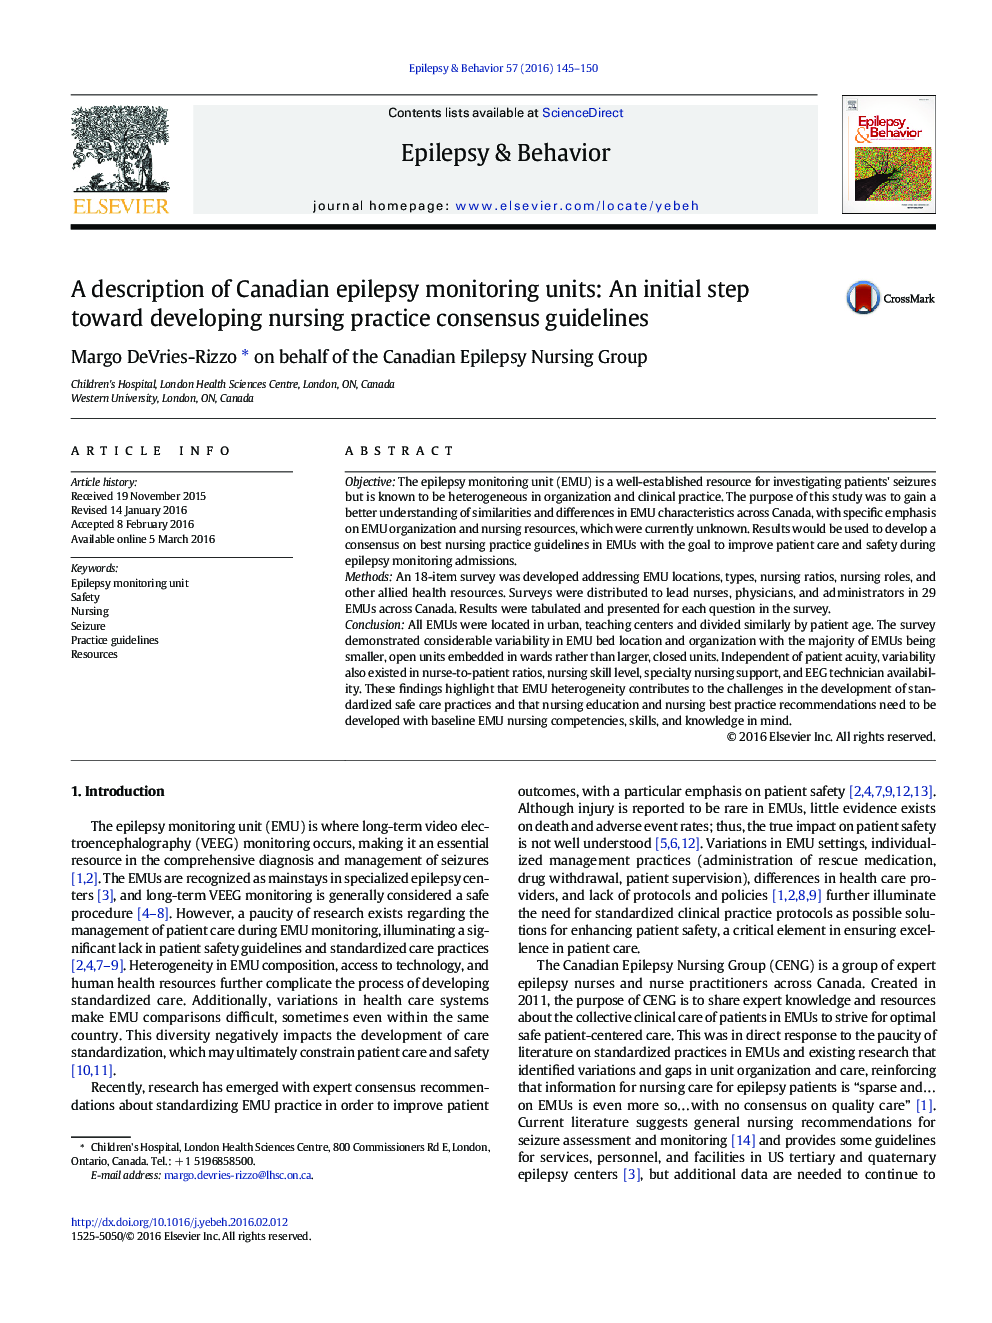 A description of Canadian epilepsy monitoring units: An initial step toward developing nursing practice consensus guidelines